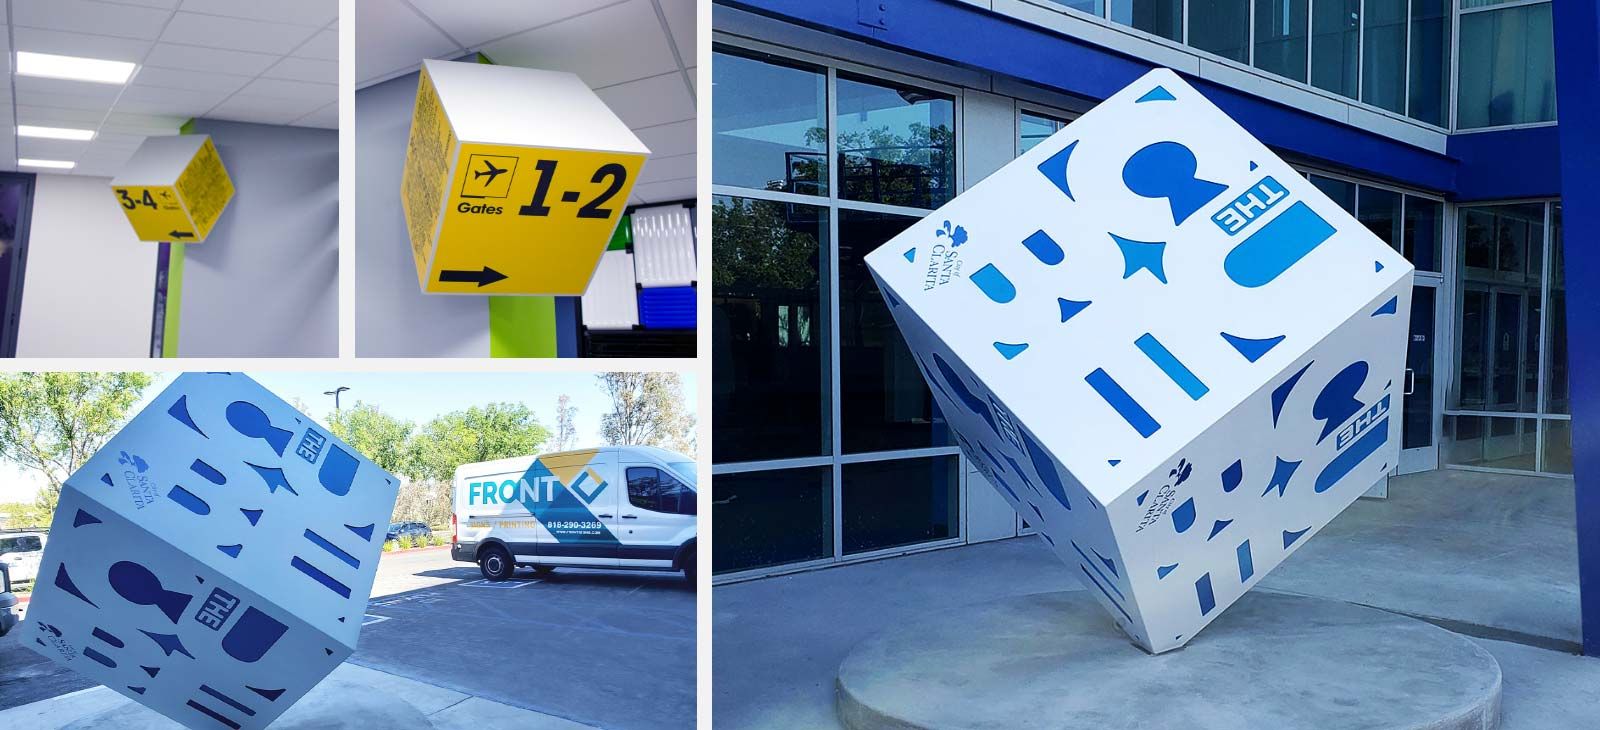 Colorful cube signage displays in hanging and freestanding styles for creative branding